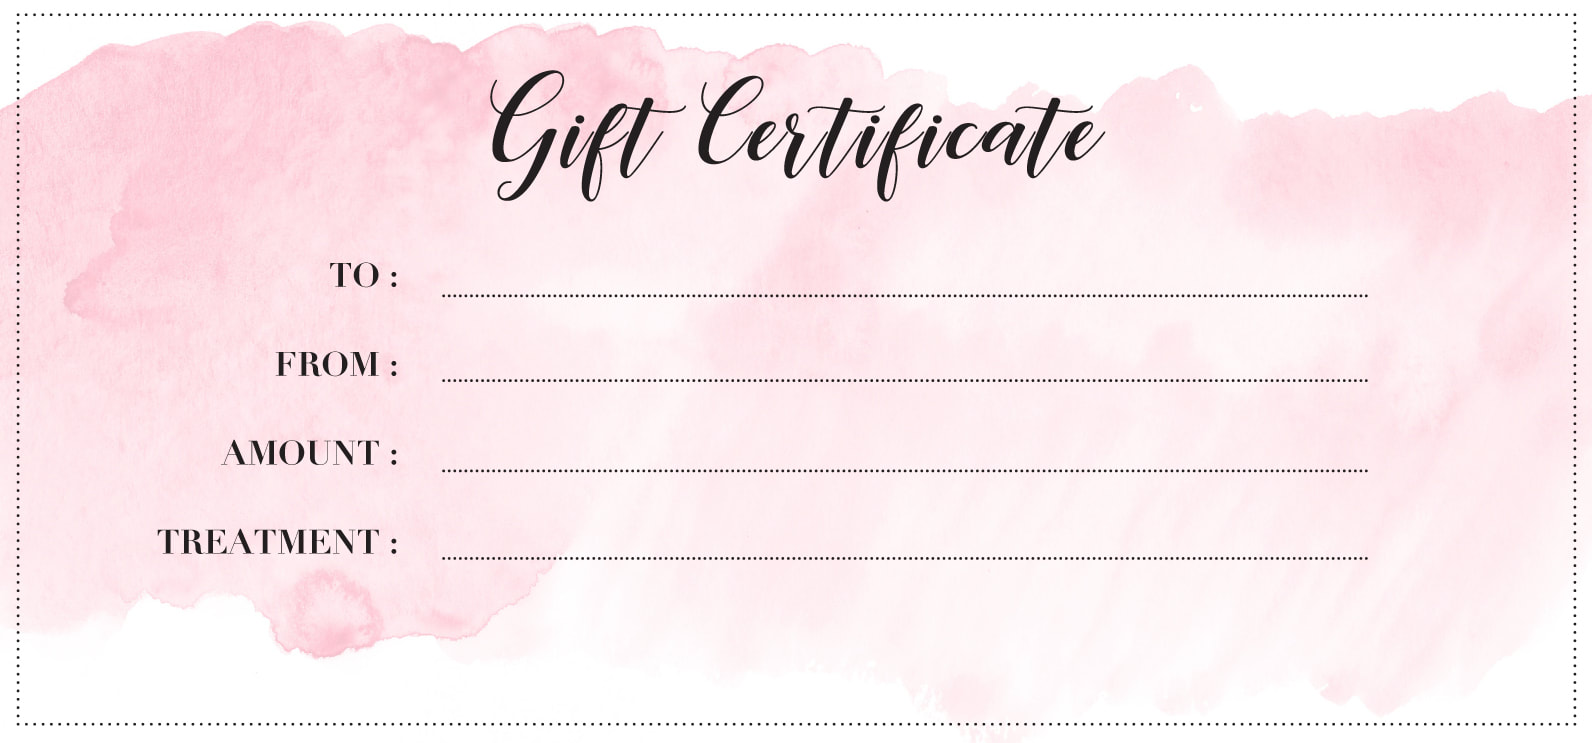 Gift Certificates - Lily Lash With Pink Gift Certificate Template